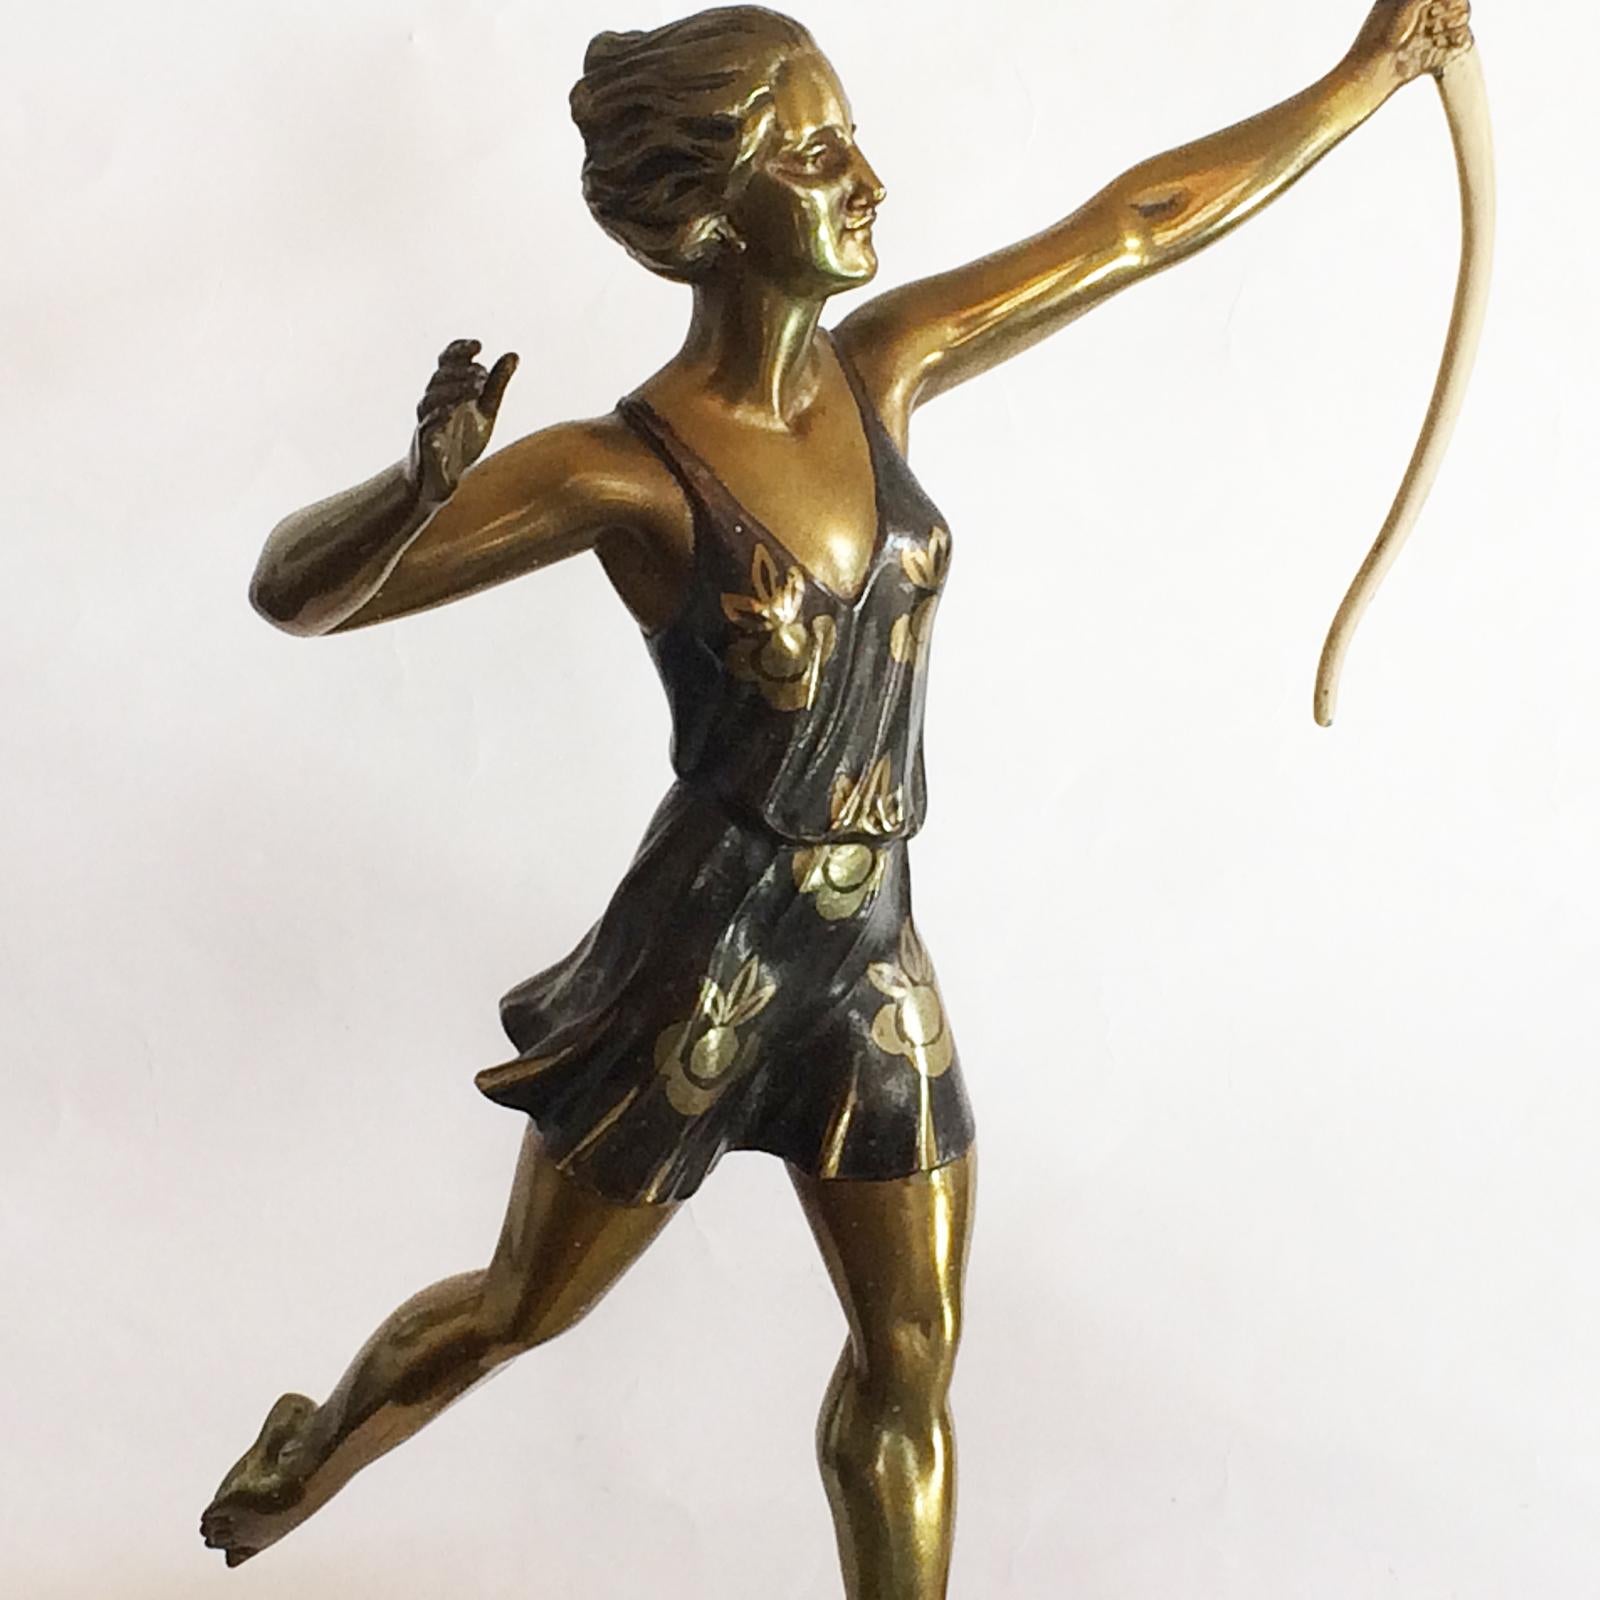 Art Deco French sculpture Diana “The Huntress” by Enrique Molins Balleste. In Fonte d' Arte, finished in gilt/bronze, cold painted dress and bow details. Mounted on brilliant rouge and white marble, with insets top and front triangle, of Green